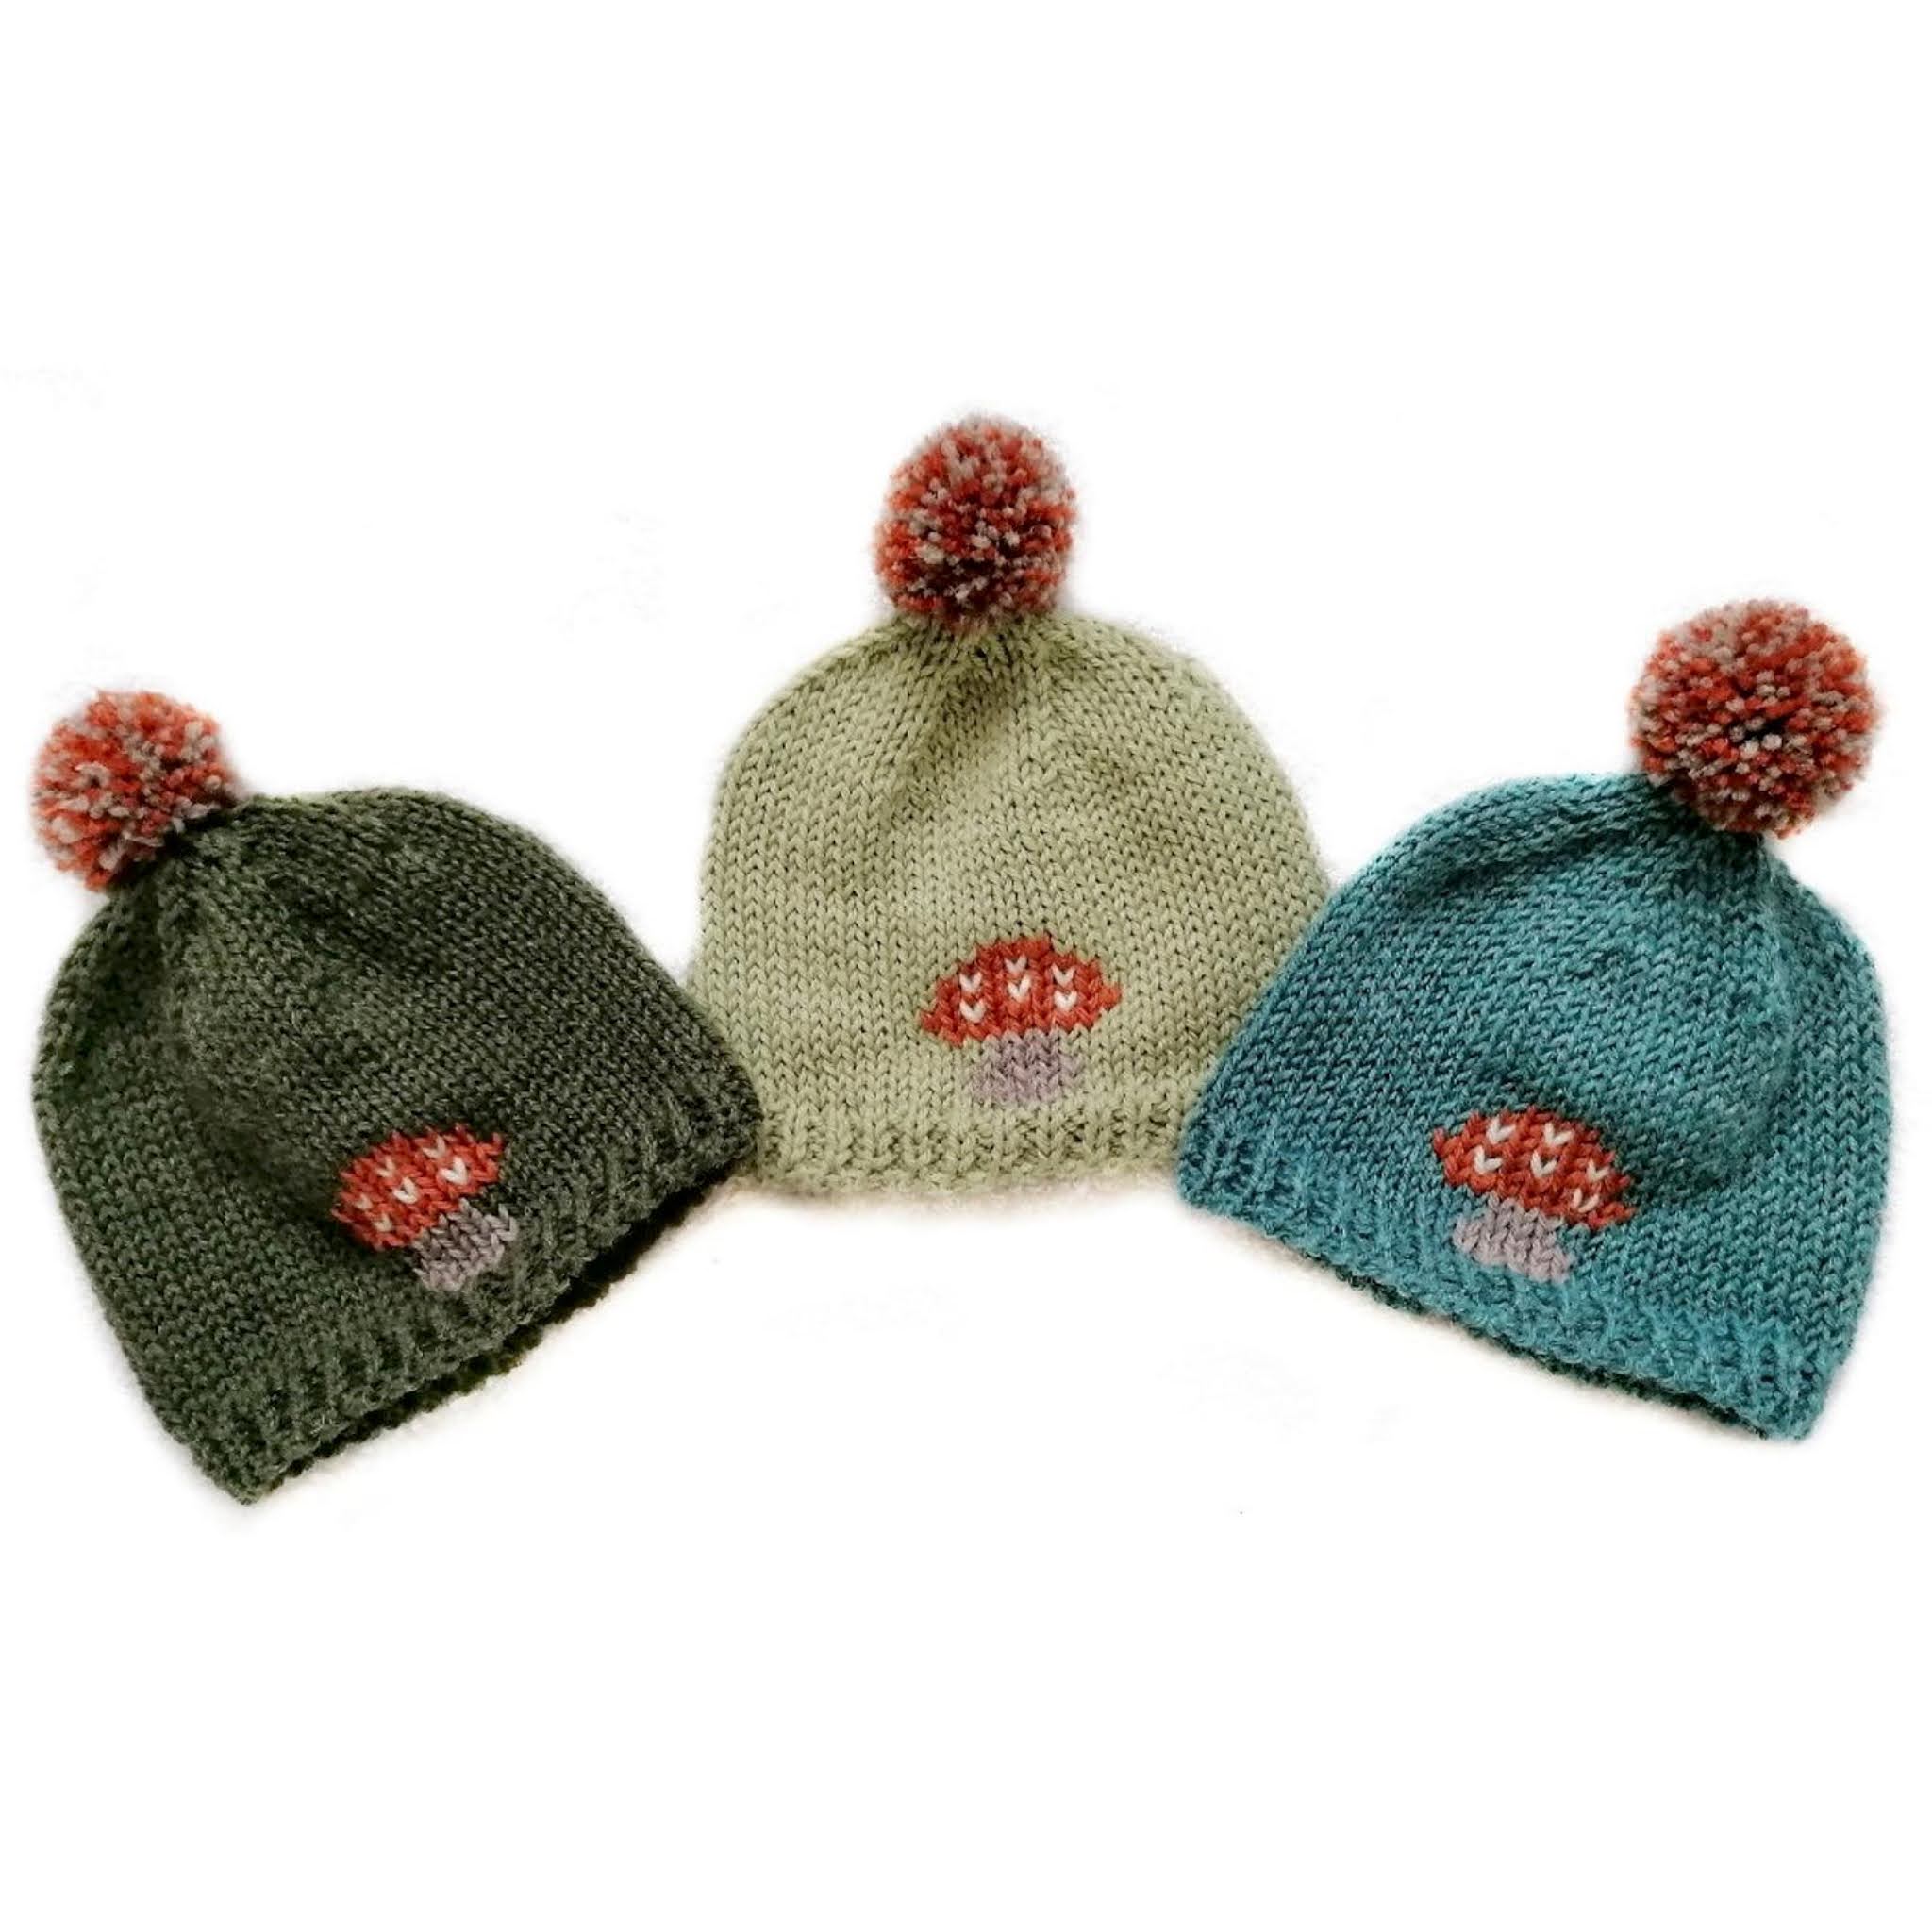 Kids Hand Knitted Mushroom Beanie Hat from TwoGreyRabbits